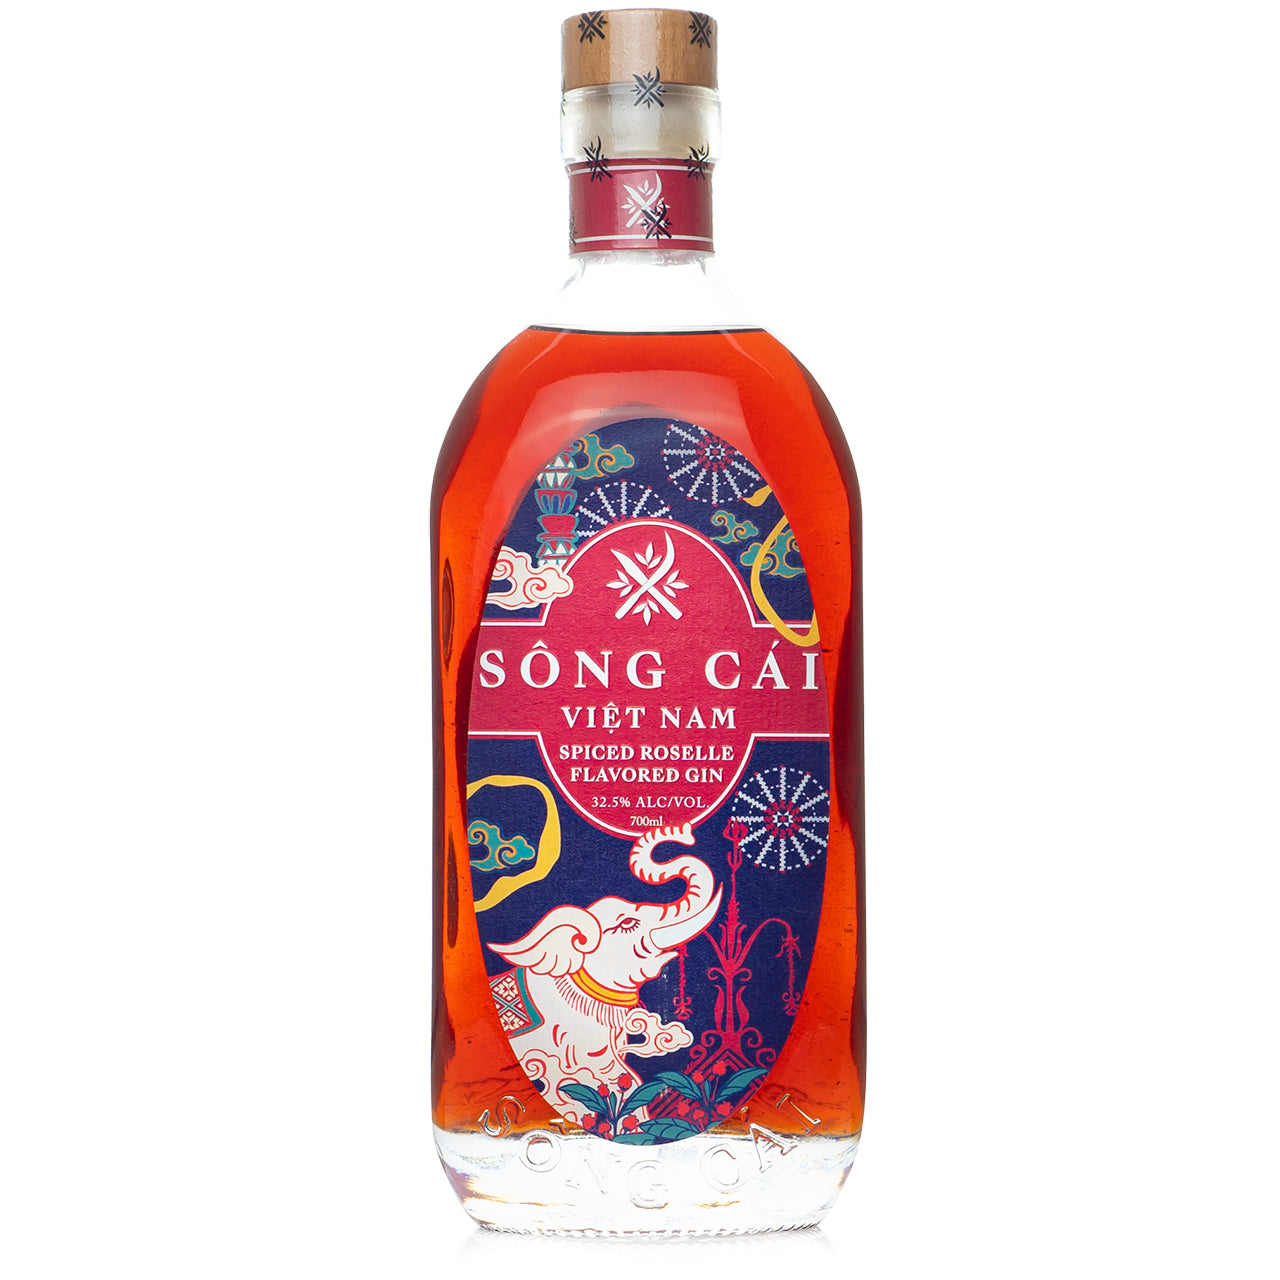 Song Cai Vietnam Spiced Roselle Gin